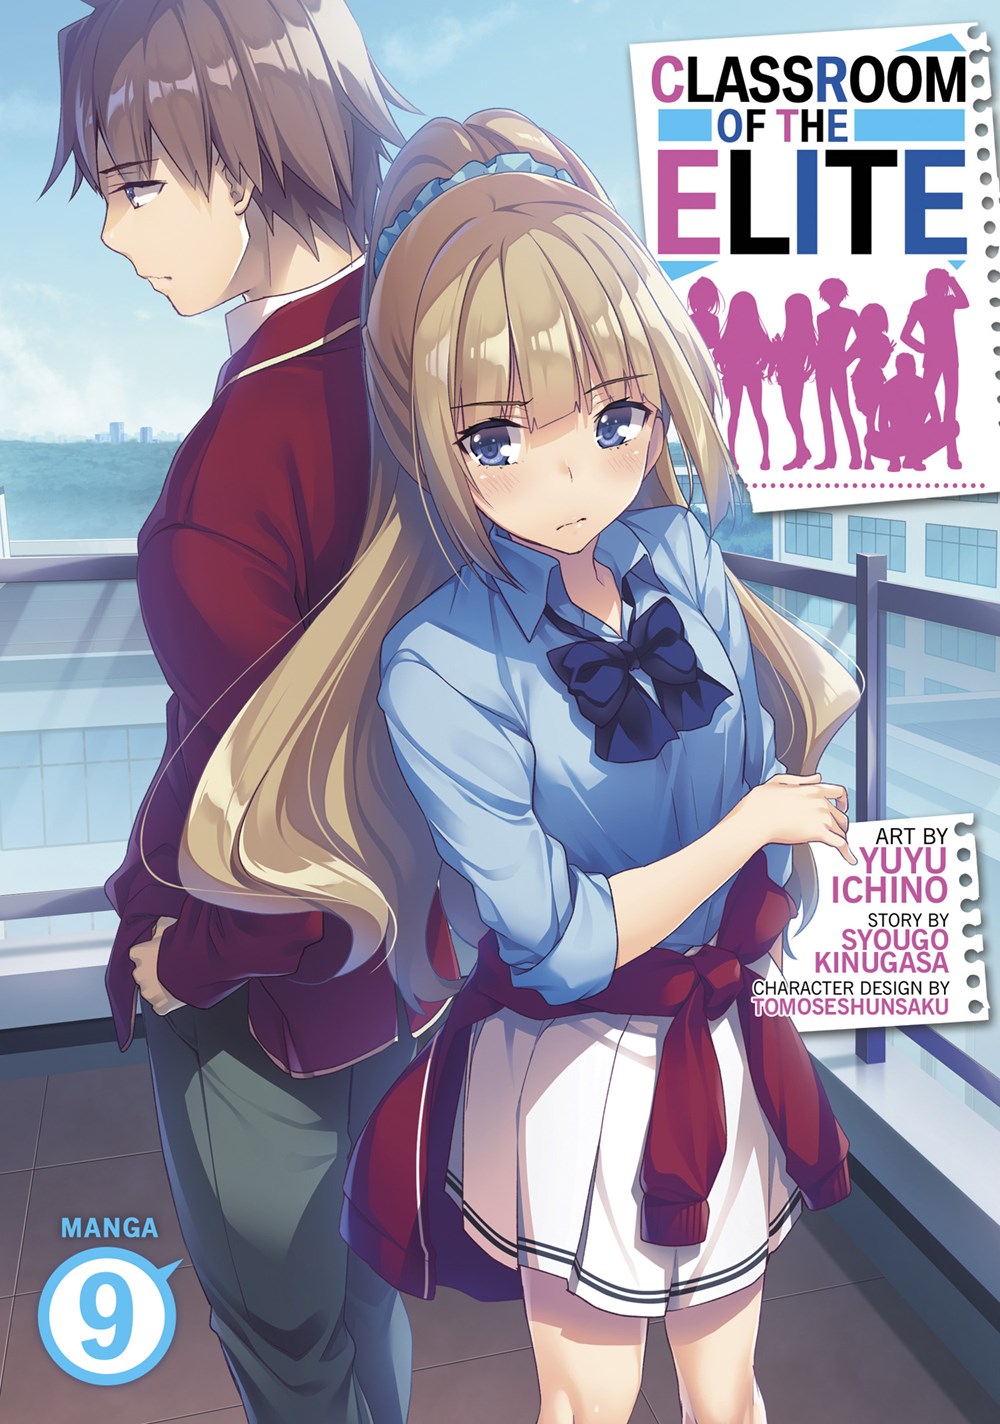 Classroom Of The Elite: Volume 9 (Chapter 3) - Part 1 - OH! Press